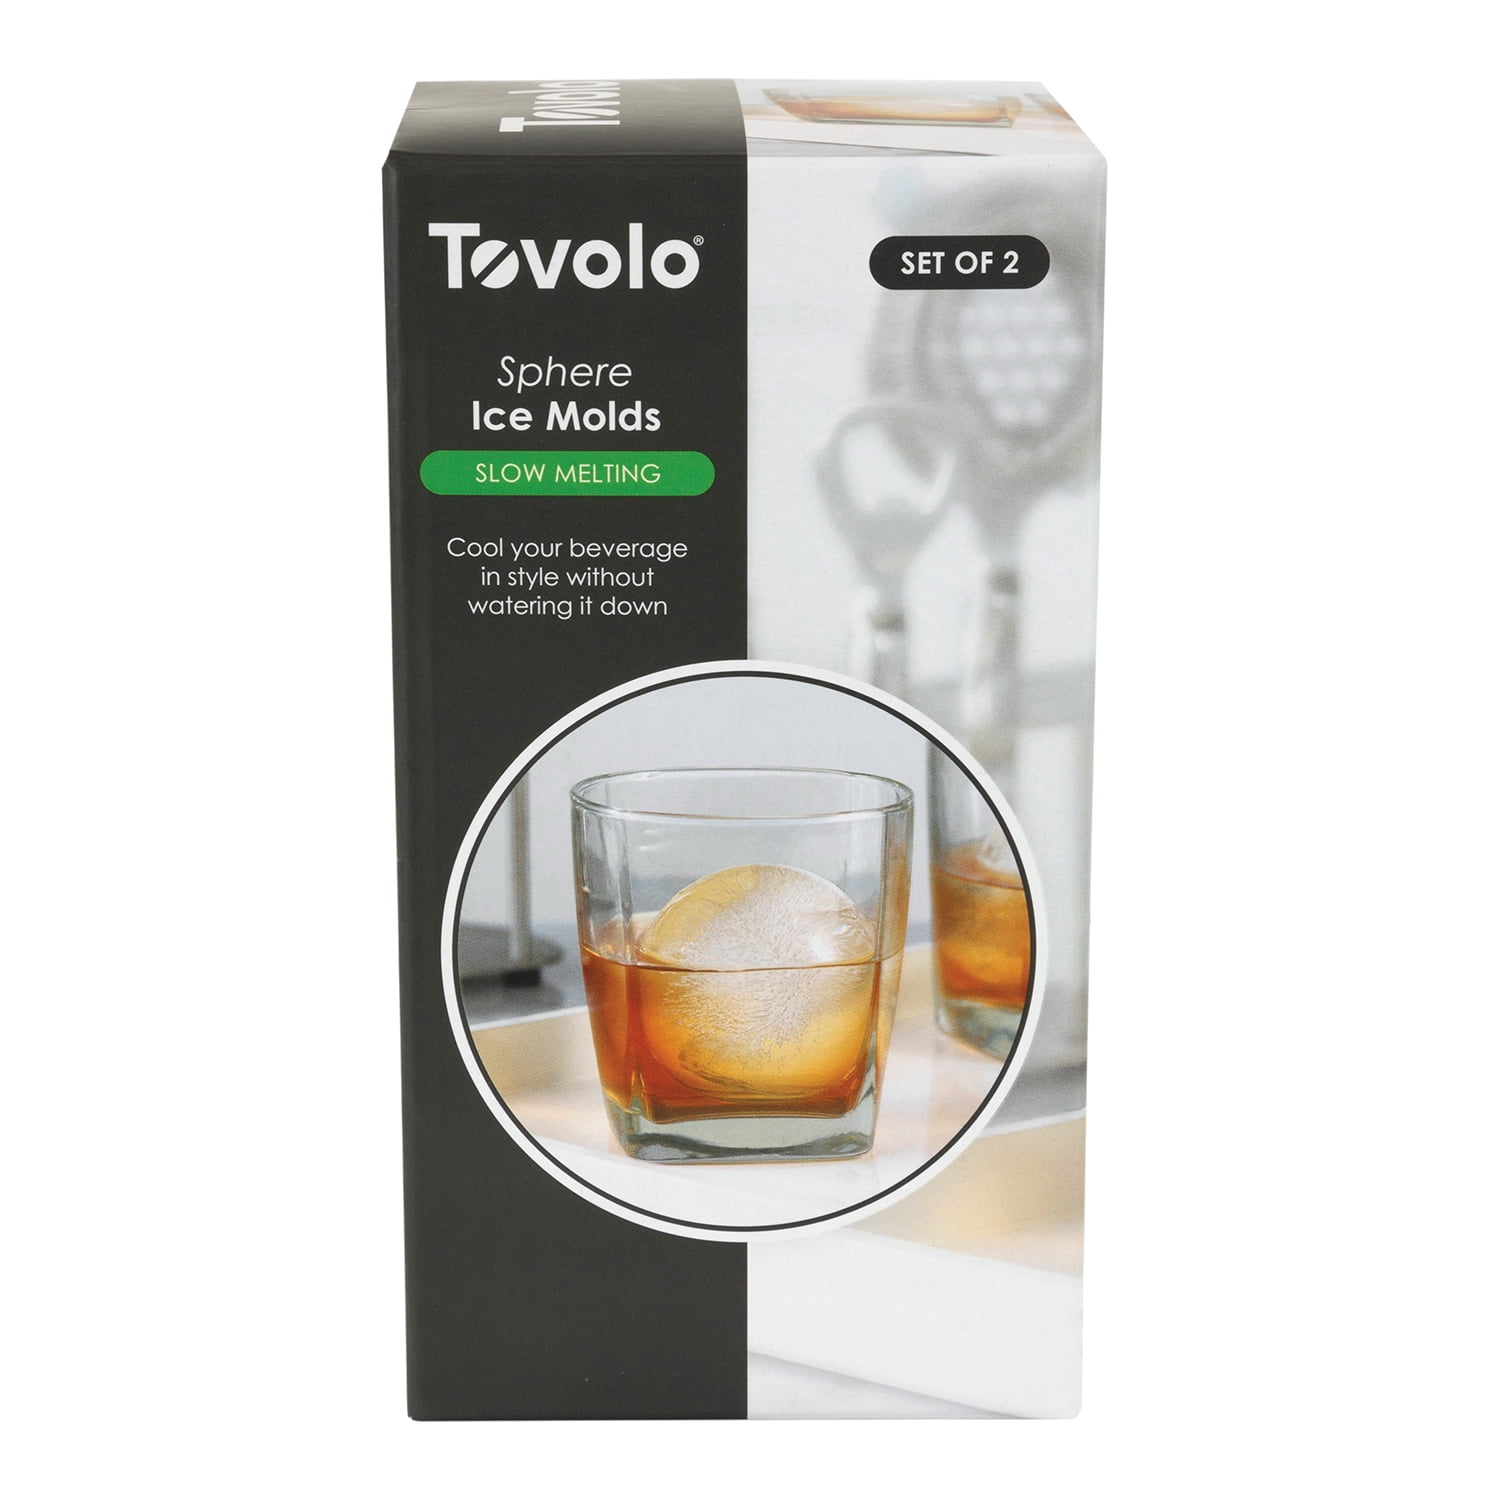 Tovolo Silicone Ice Mold, Sphere Large for Slow Melting Ice